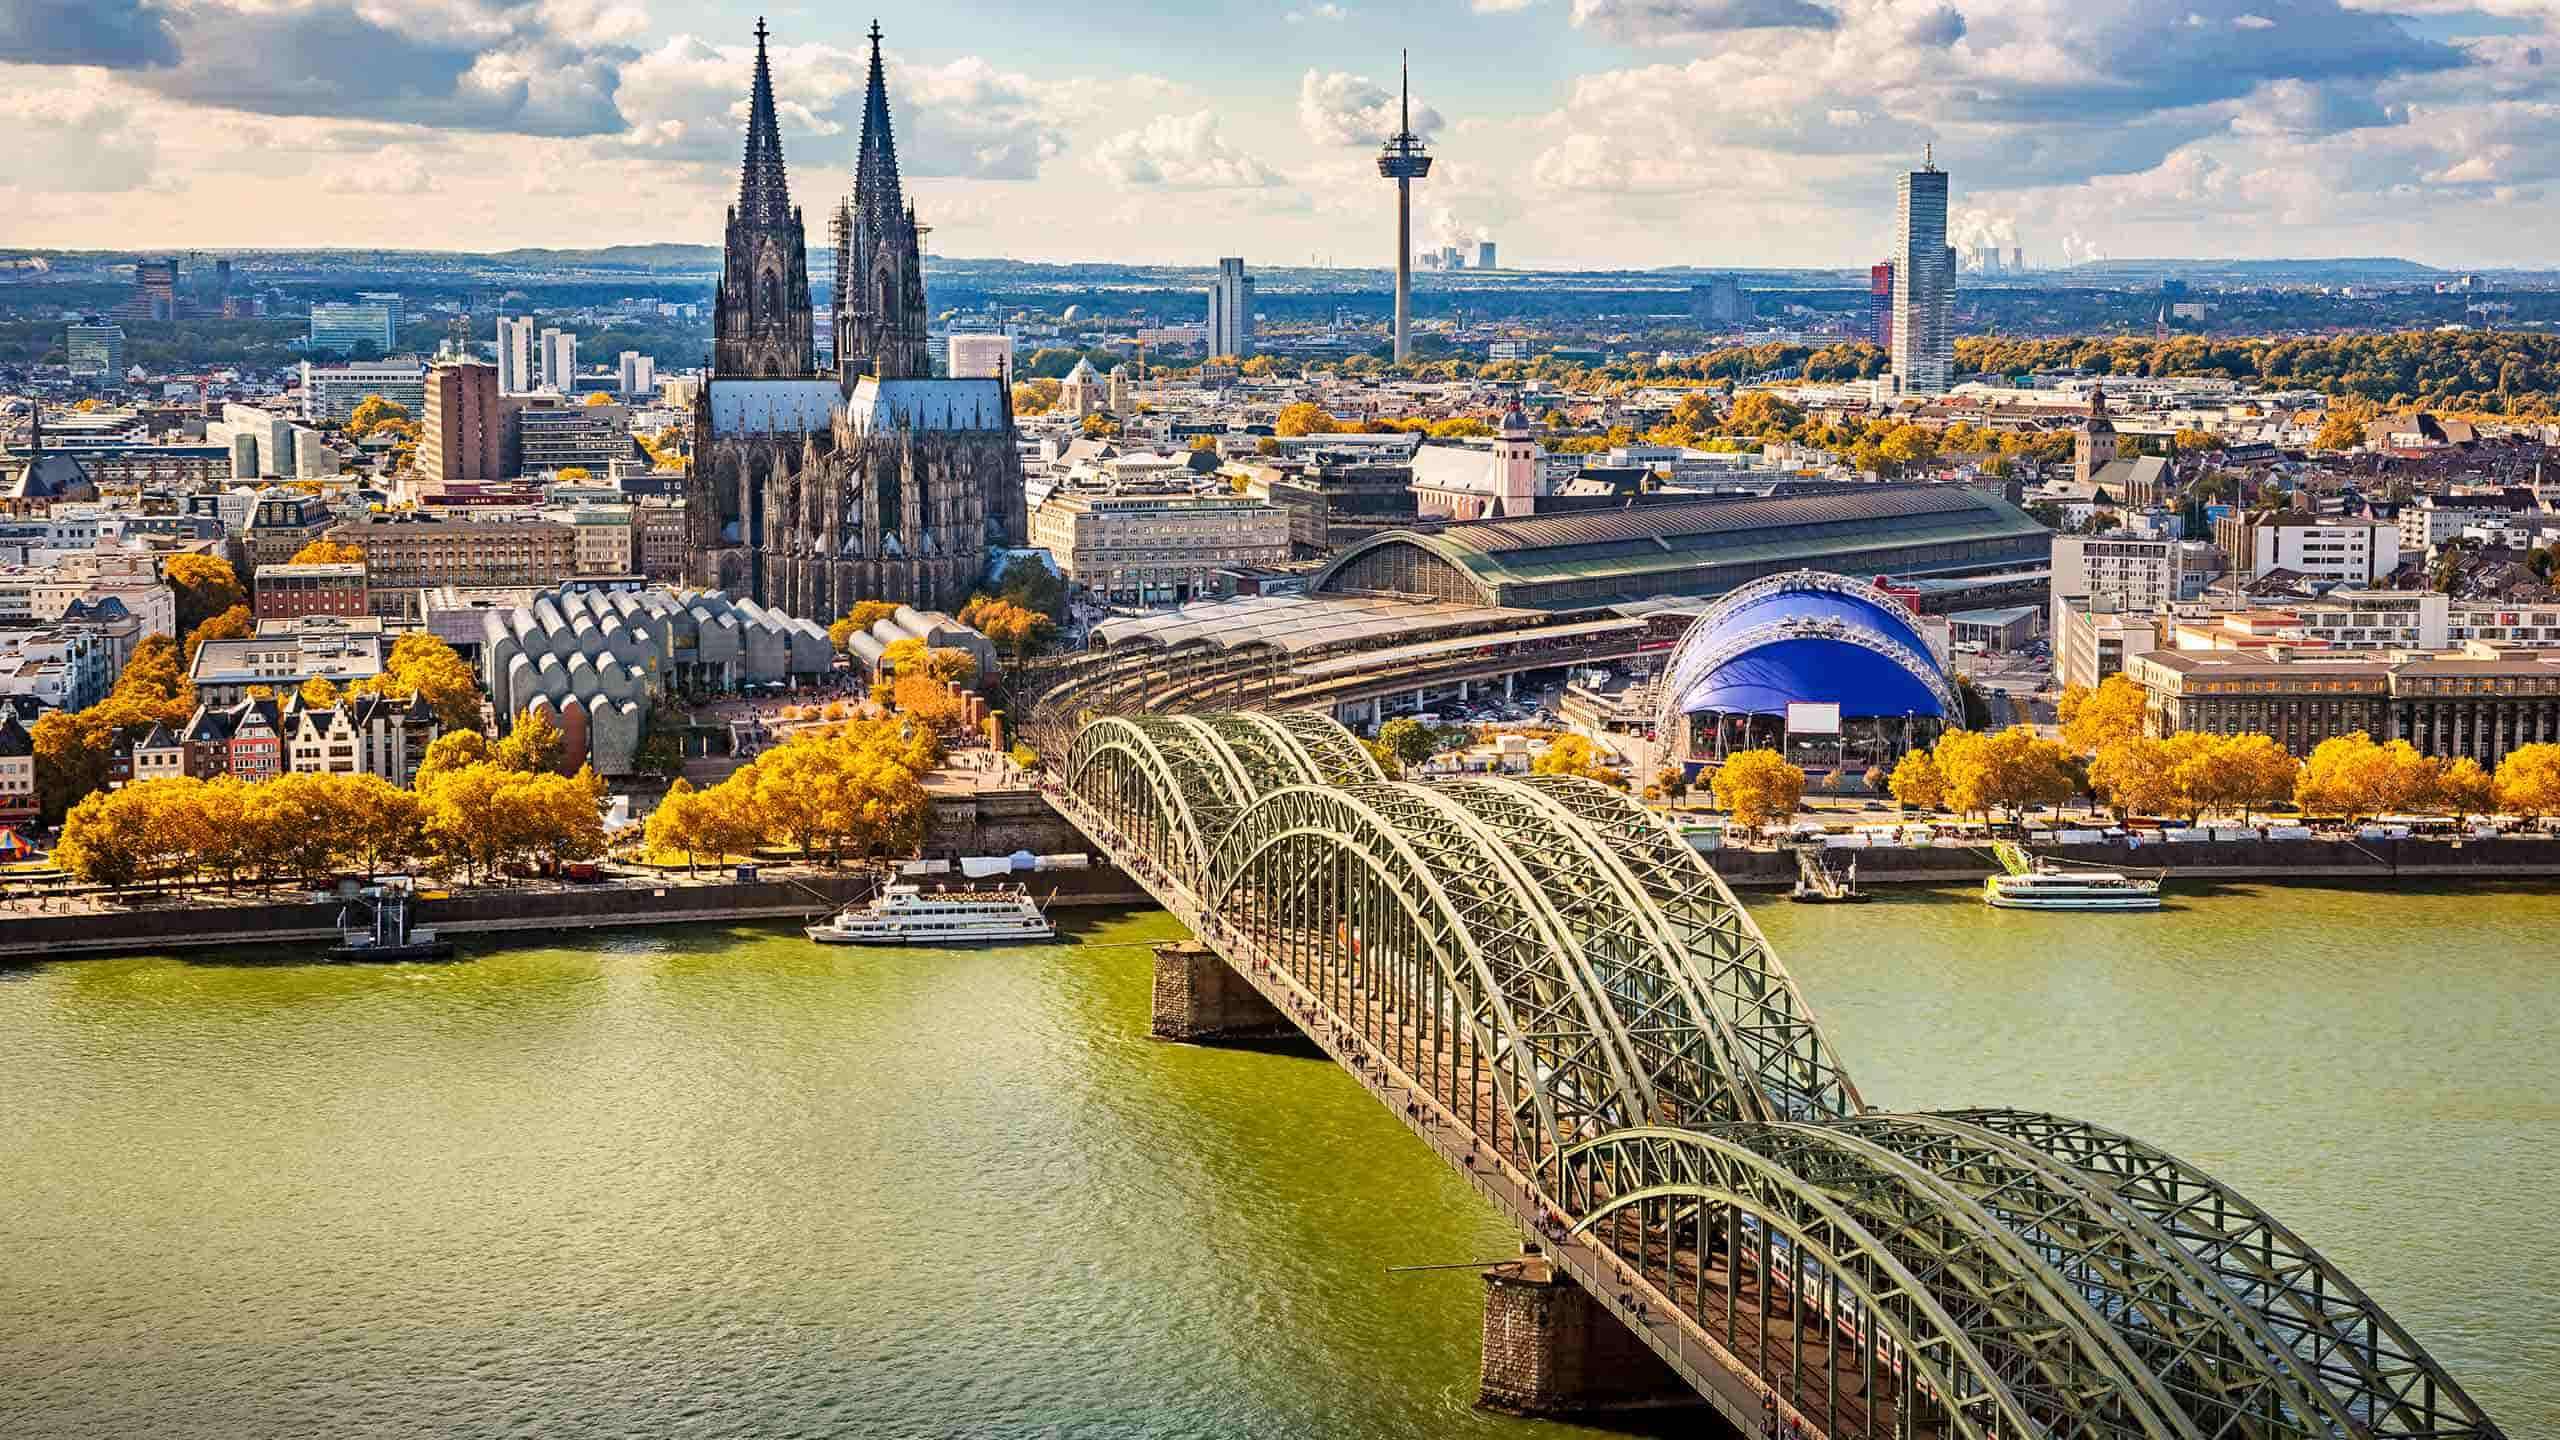 Rhine River Cruise & Bike (Regal Waterways From Basel To Amsterdam) 8D7N, Fully Guided